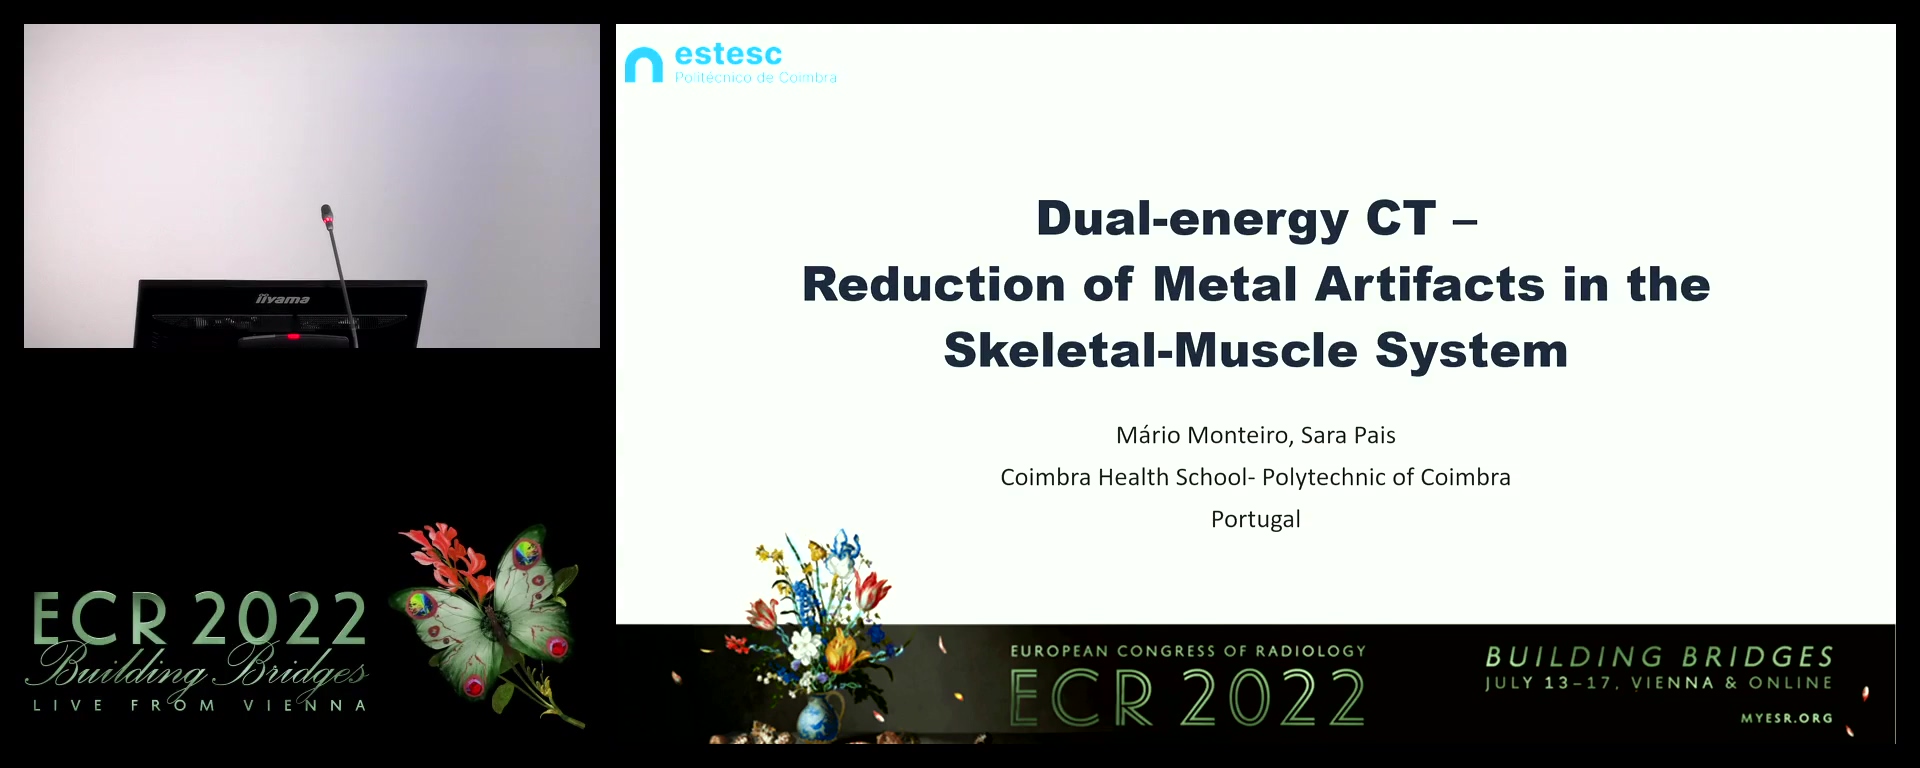 Dual-energy CT: reduction of metal artifacts in the skeletal-muscle system - Mário Monteiro, COIMBRA / PT